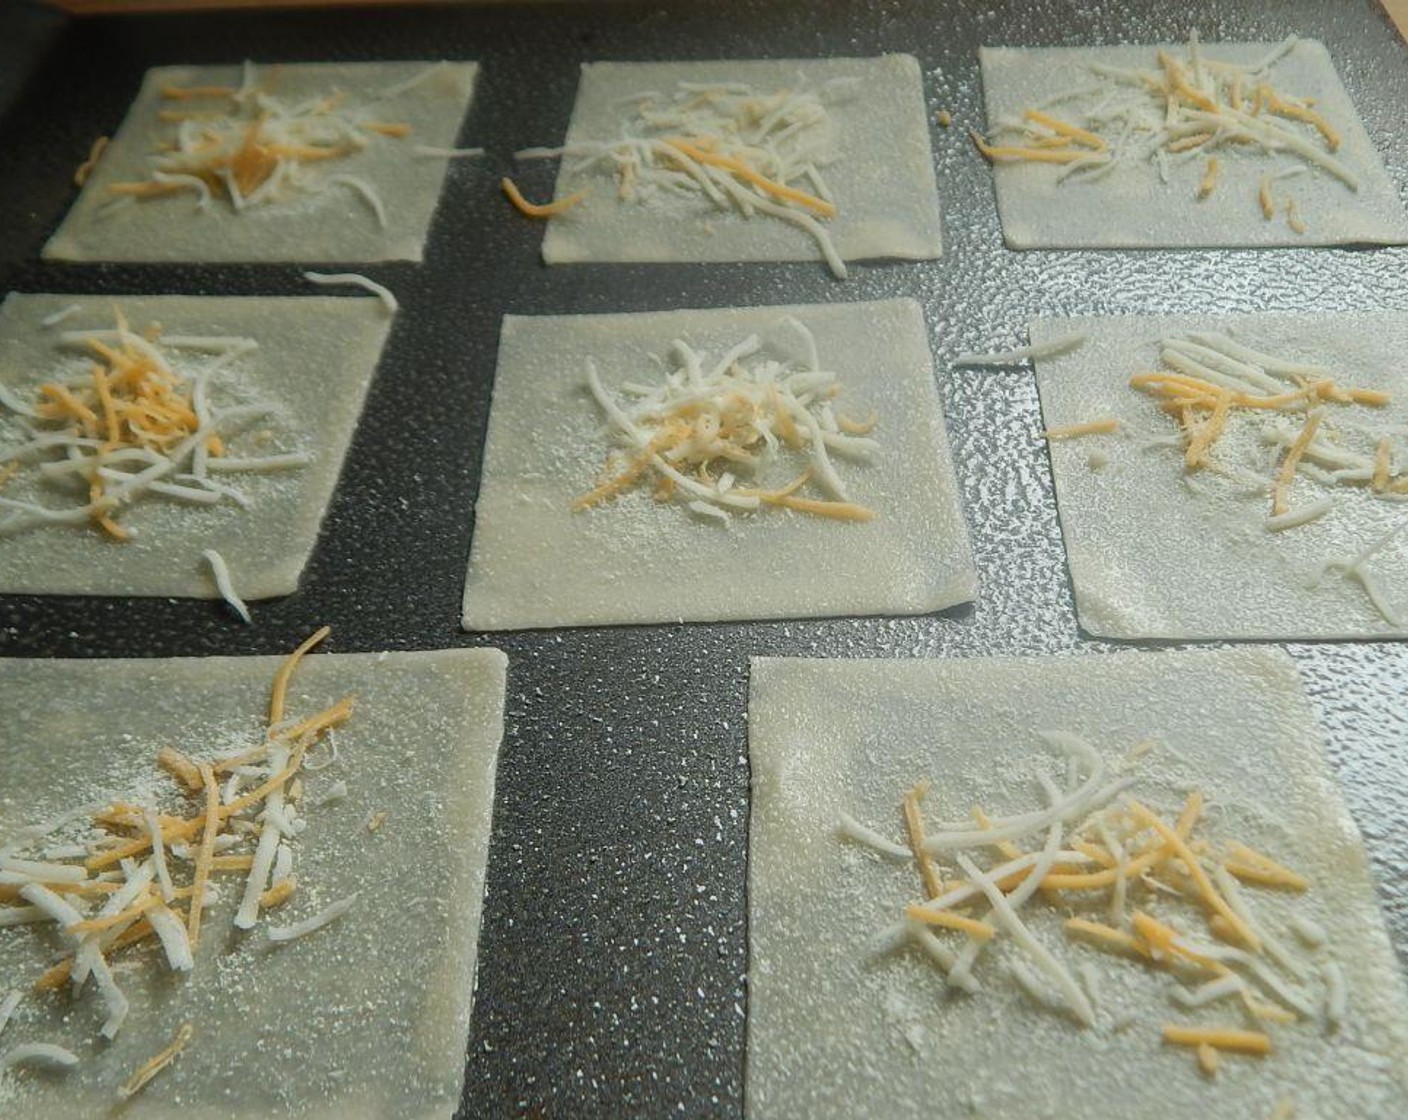 step 3 Lay out your wontons (make as many as you wish). Spray the tops of the Wonton Wrappers (1 pckg). Sprinkle a little bit of Light Shredded Cheese Blend (to taste) and Grated Parmesan Cheese (to taste) on top, you don't need much at all.